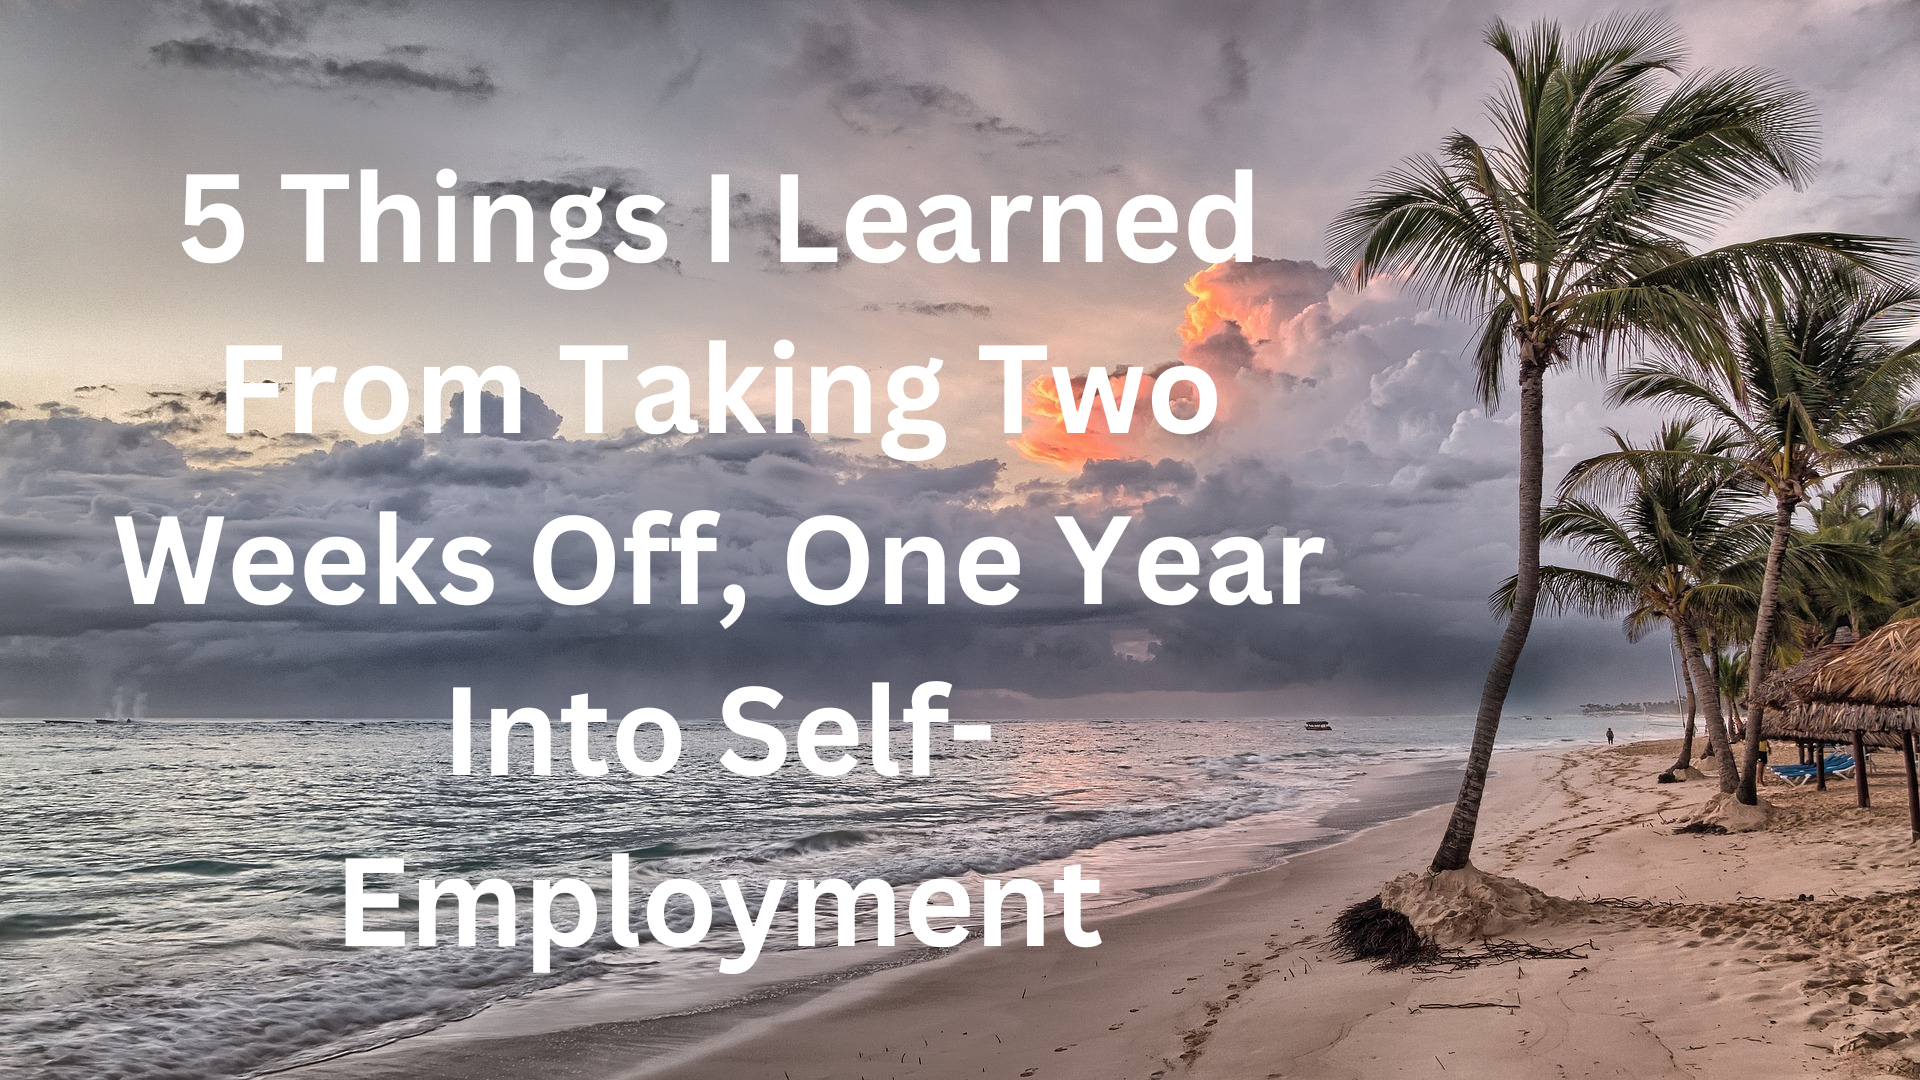 5 Things I Learned From Taking Time Off (2 Weeks), One Year Into Self-Employment